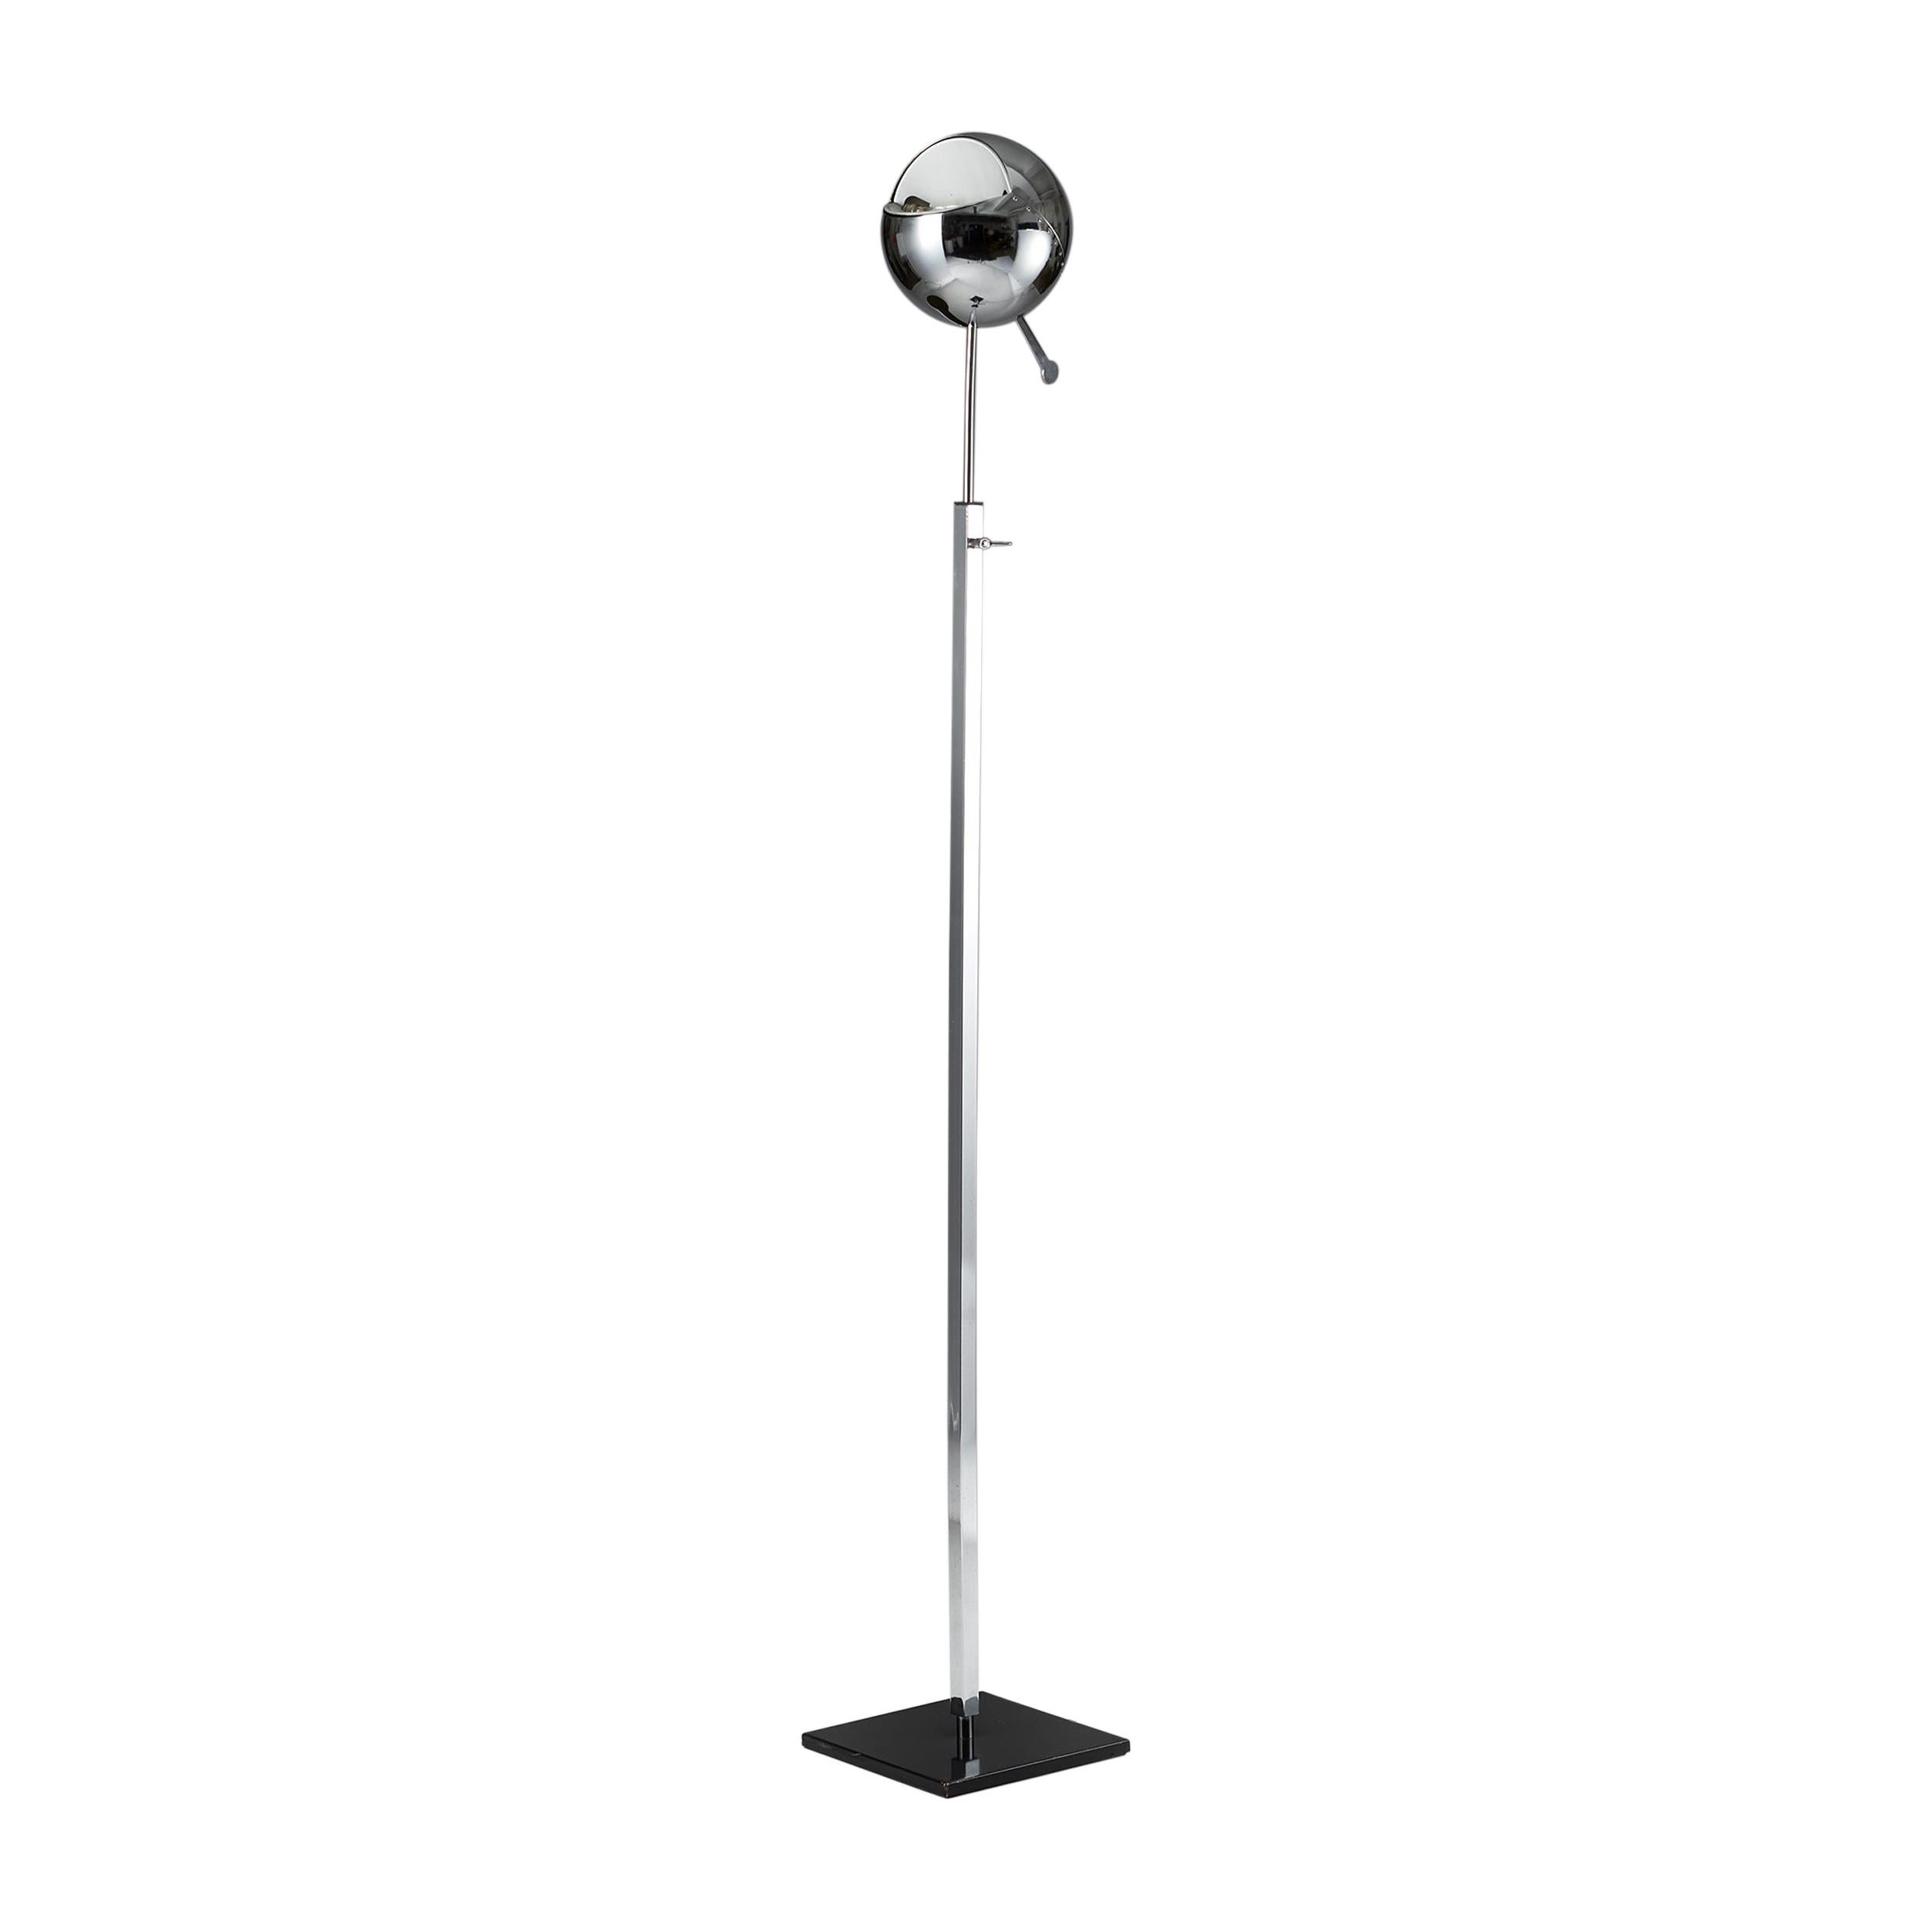 Floor Lamp “Fire Ball” Designed by Carlo Forcolini